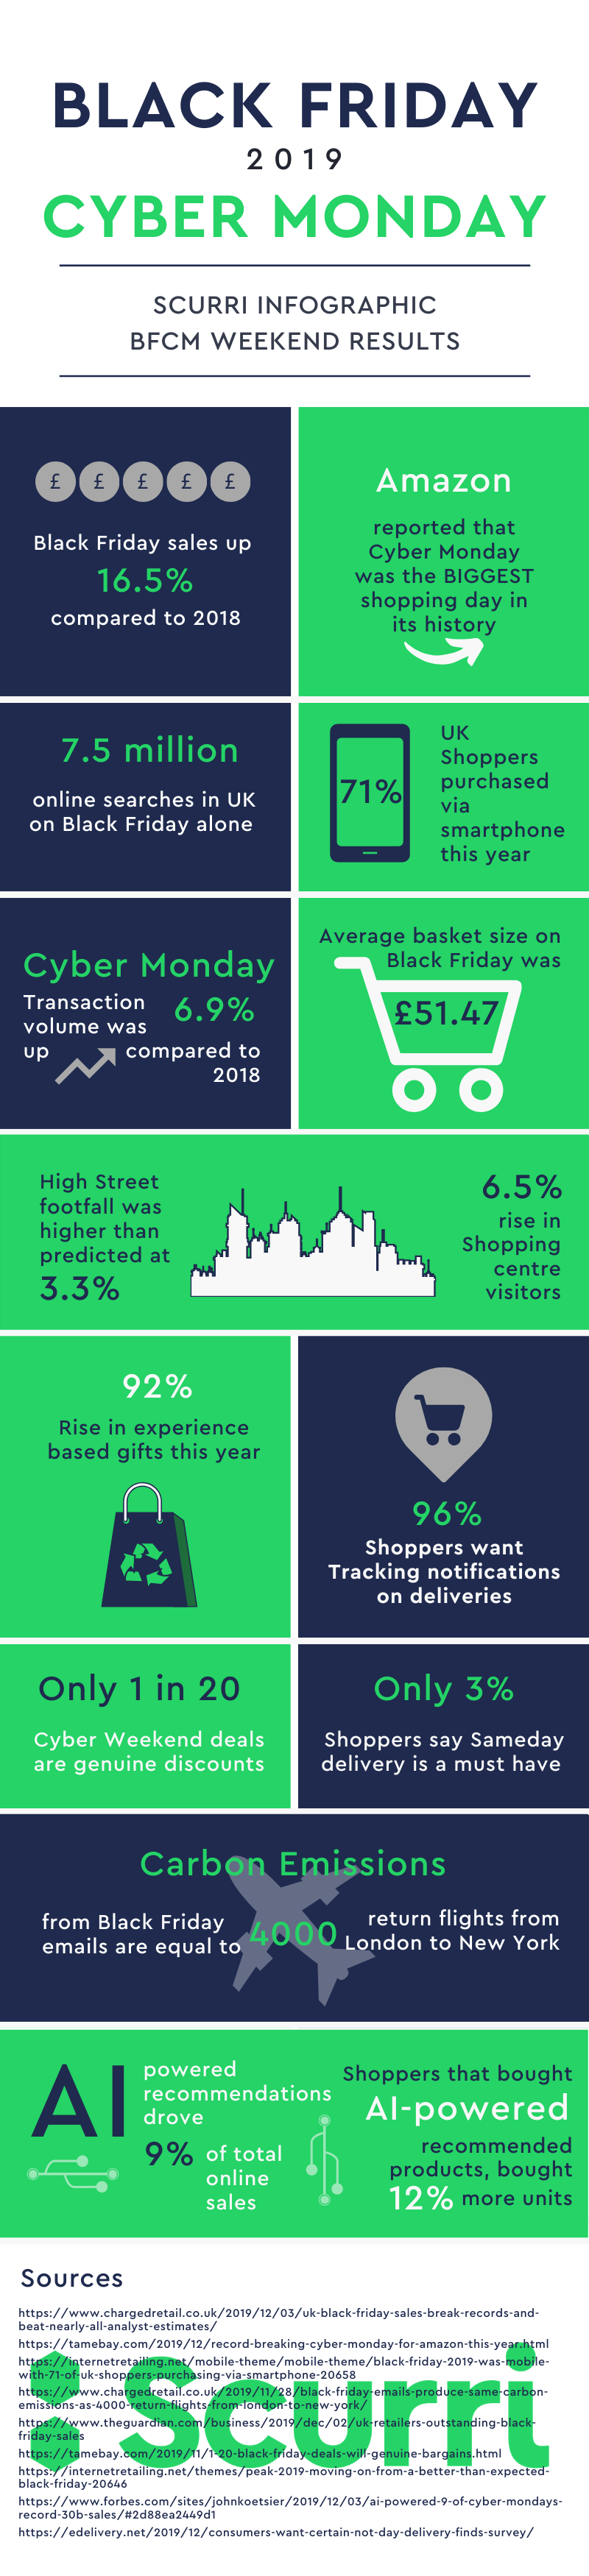 Scurri Infographic Ecommerce Black Friday Cyber Monday Results Stats 2019 Scurri